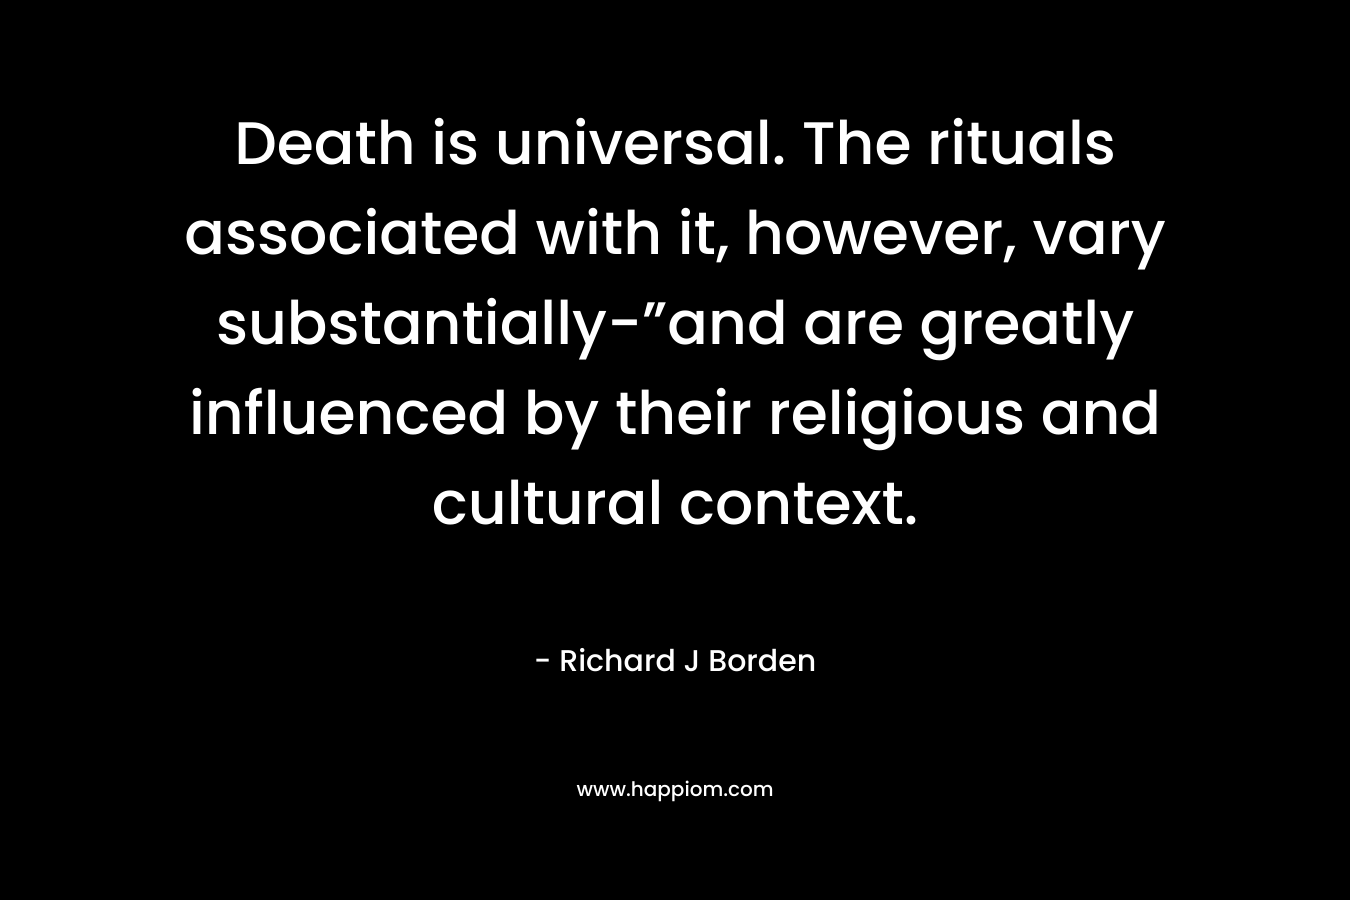 Death is universal. The rituals associated with it, however, vary substantially-”and are greatly influenced by their religious and cultural context. – Richard J Borden